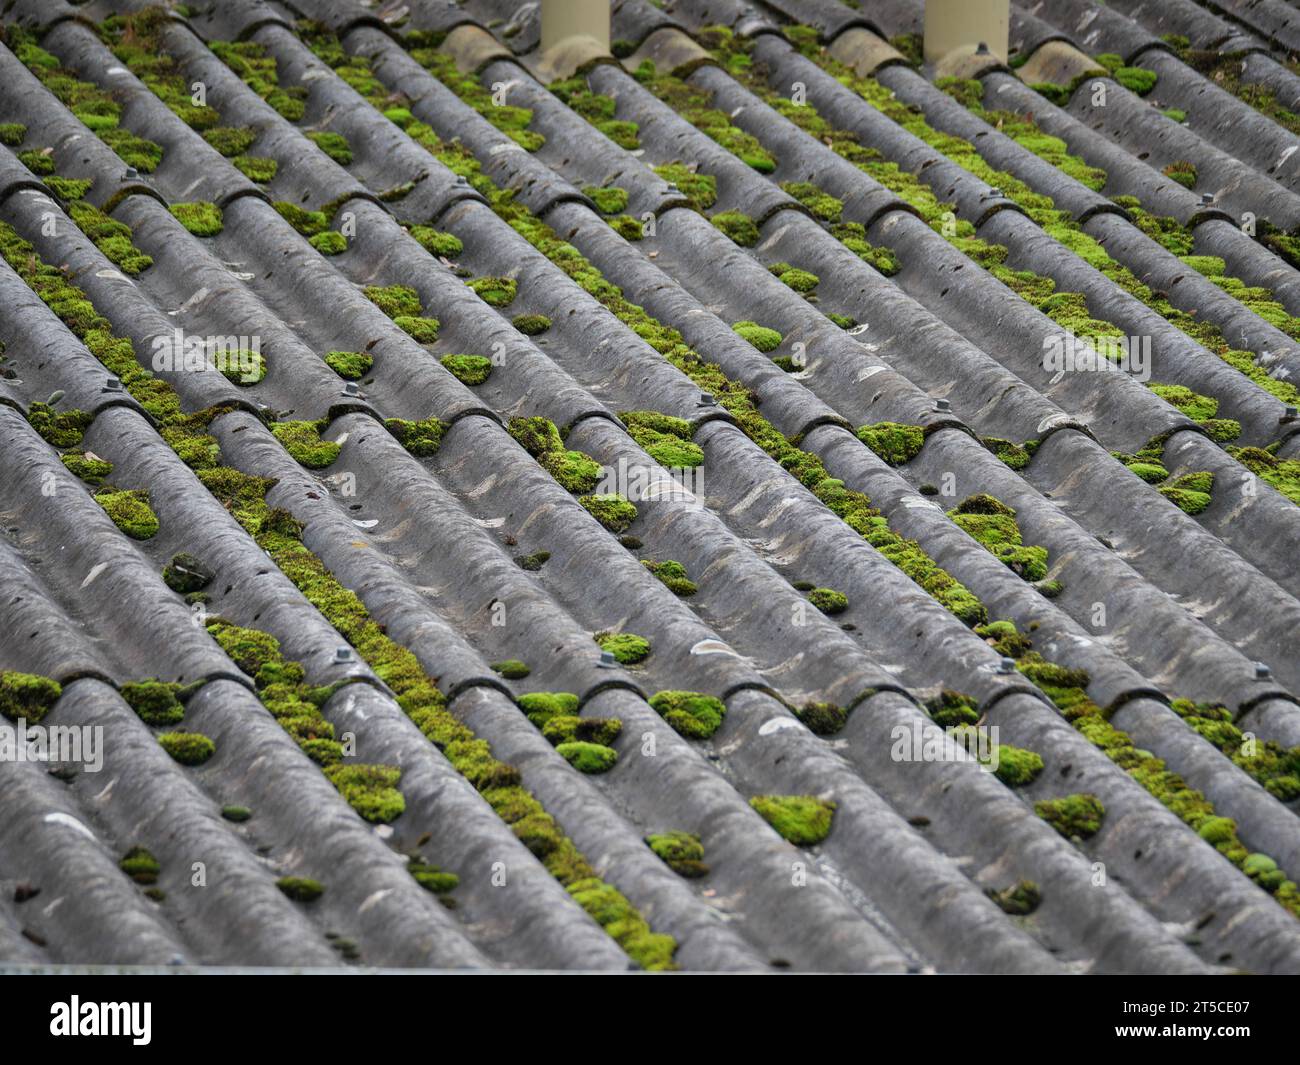 Green moss cushion growing on a roof made of gray corrugated asbestos sheets Stock Photo